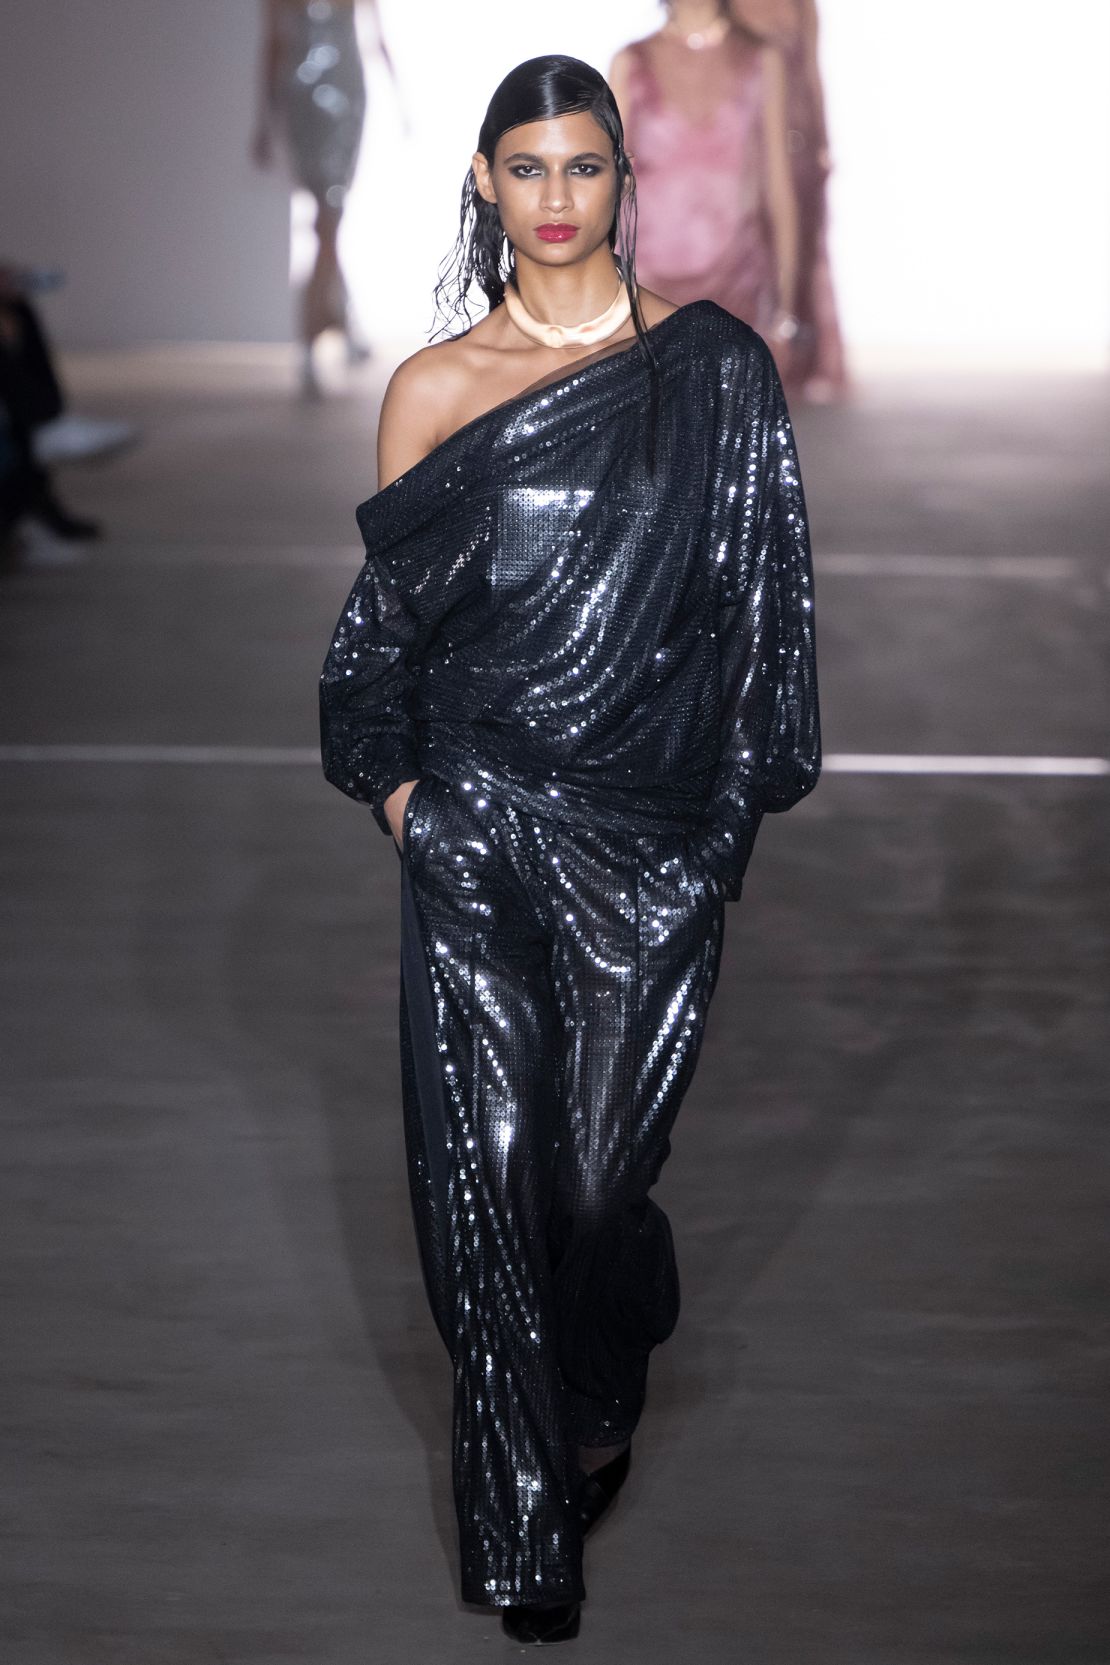 Prabal Gurung’s collection was both melancholic and dreamlike, with the designer explaining that he had transformation and metamorphosis on his mind following the loss of a family member.